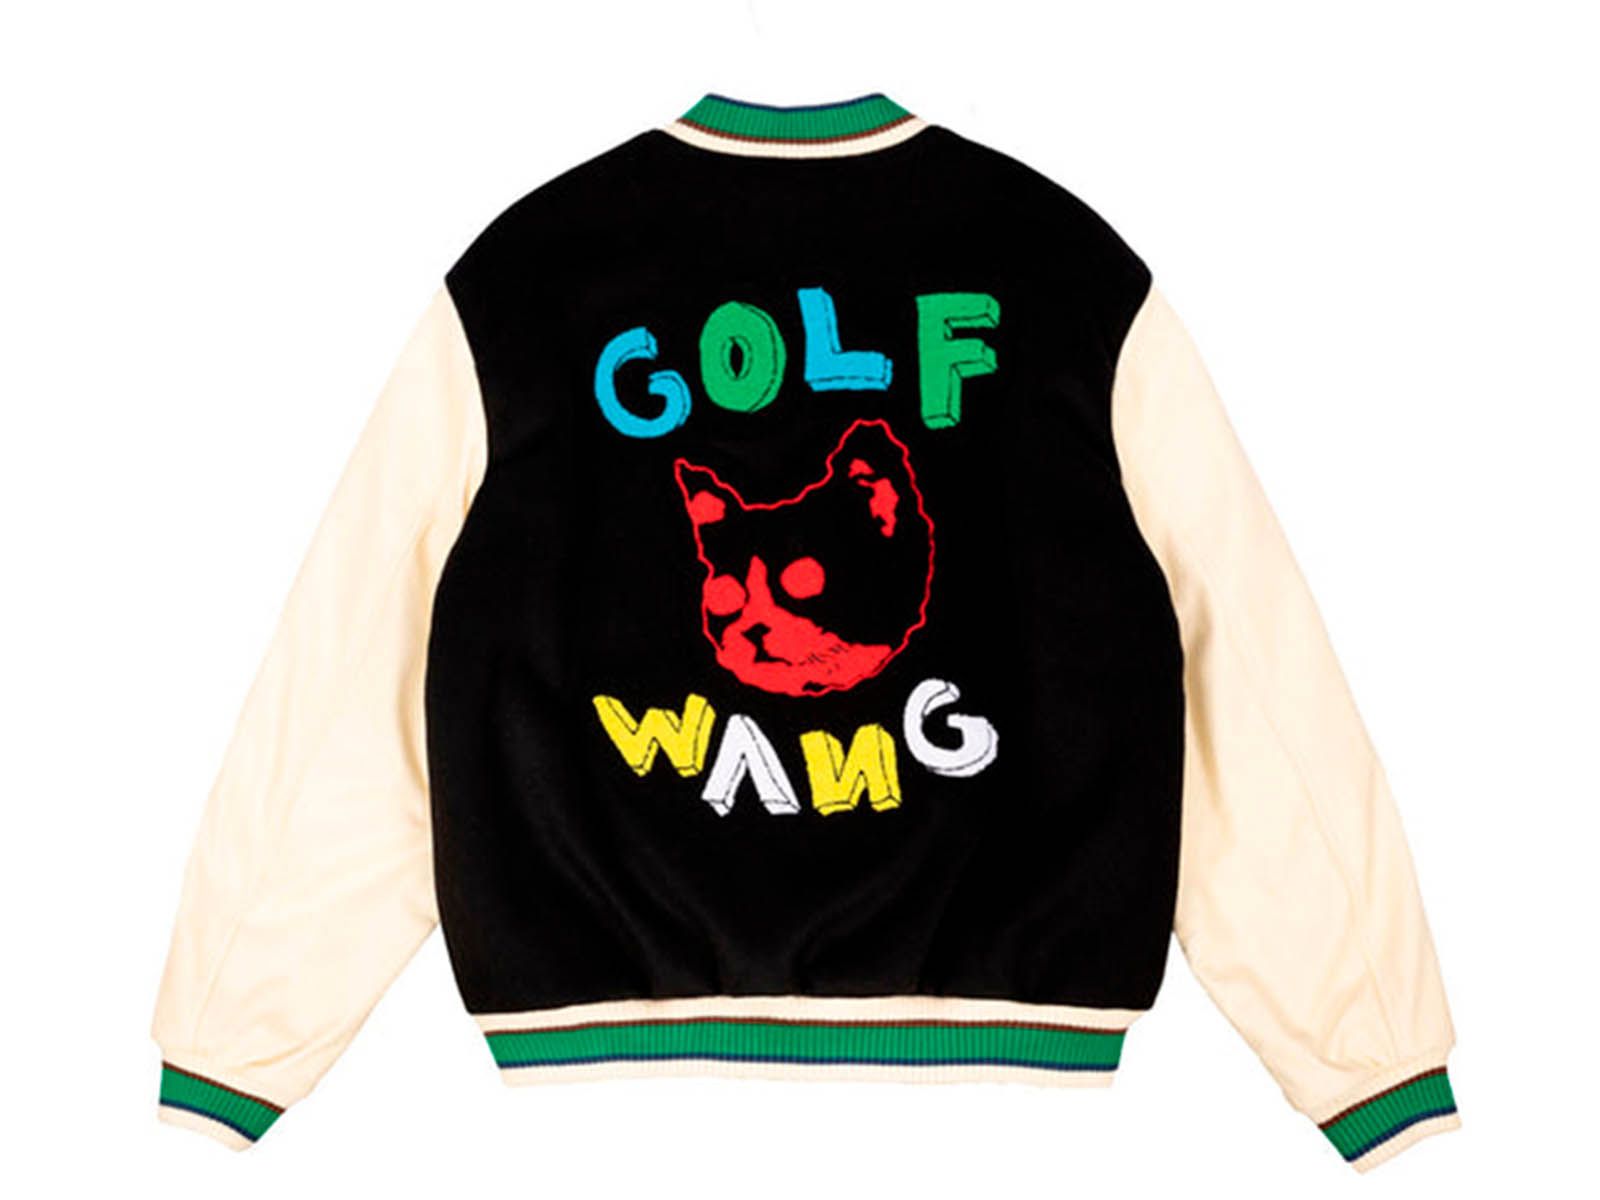 Tyler, the Creator celebrates 10th anniversary of ‘WOLF’ album with special merchandising